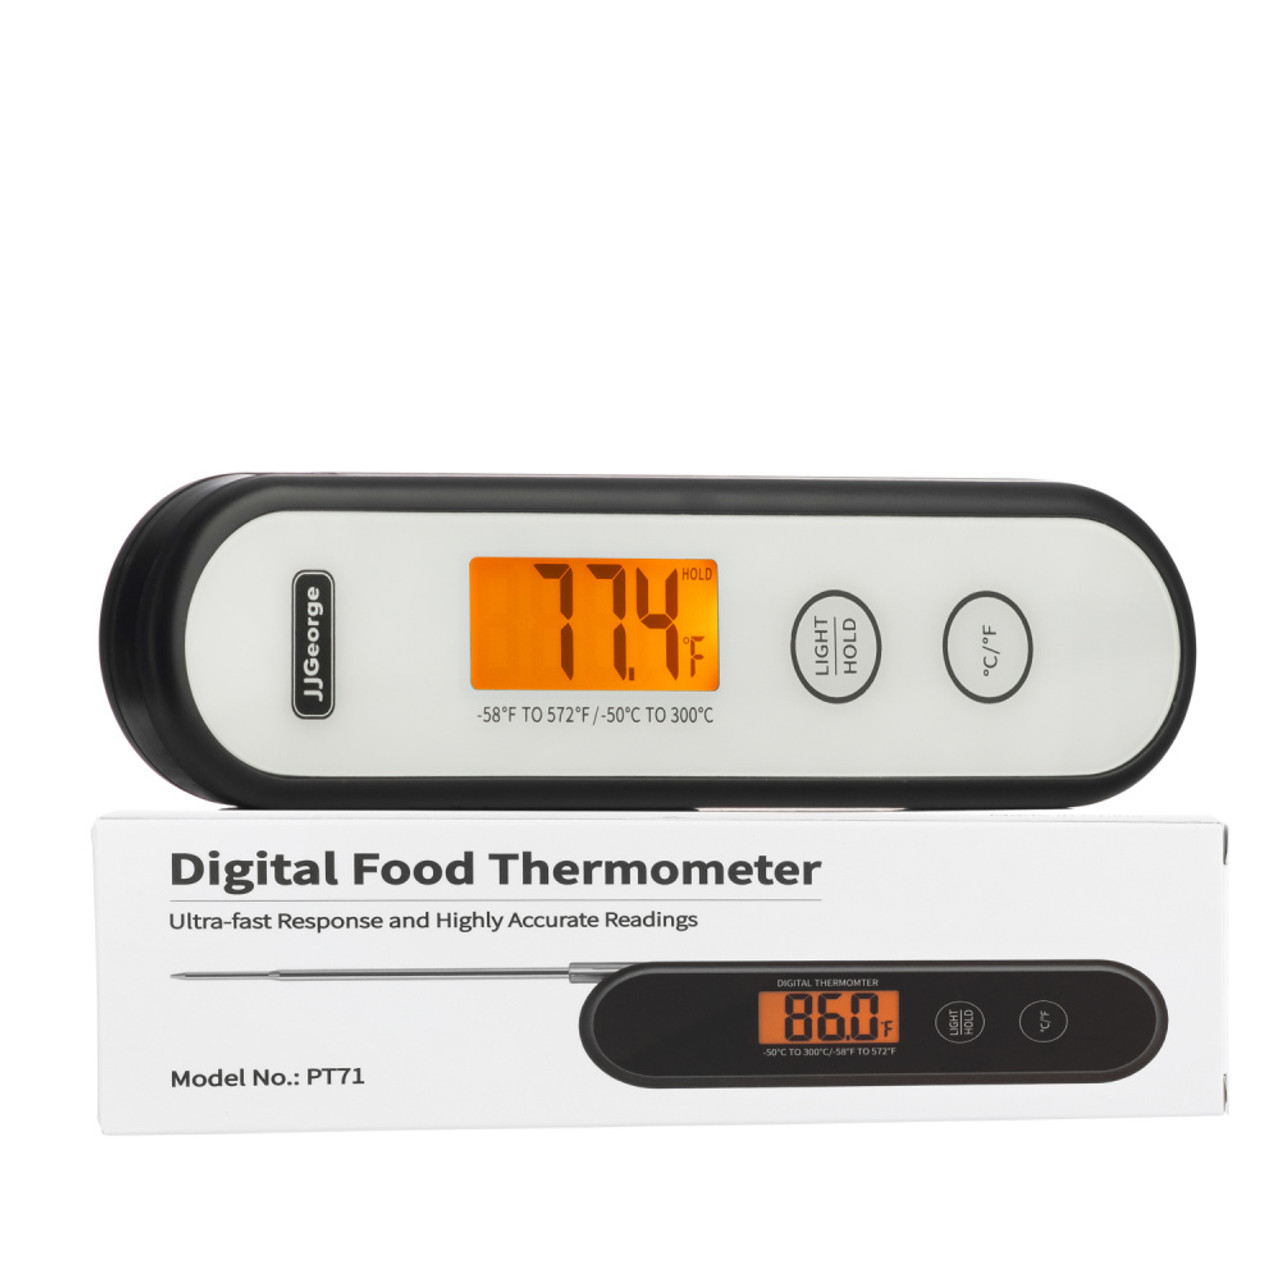 https://cdn11.bigcommerce.com/s-4avkif/images/stencil/1280x1280/products/197/779/JJGeorge_Instant_Read_Meat_Thermometer__59513.1698844763.jpg?c=2